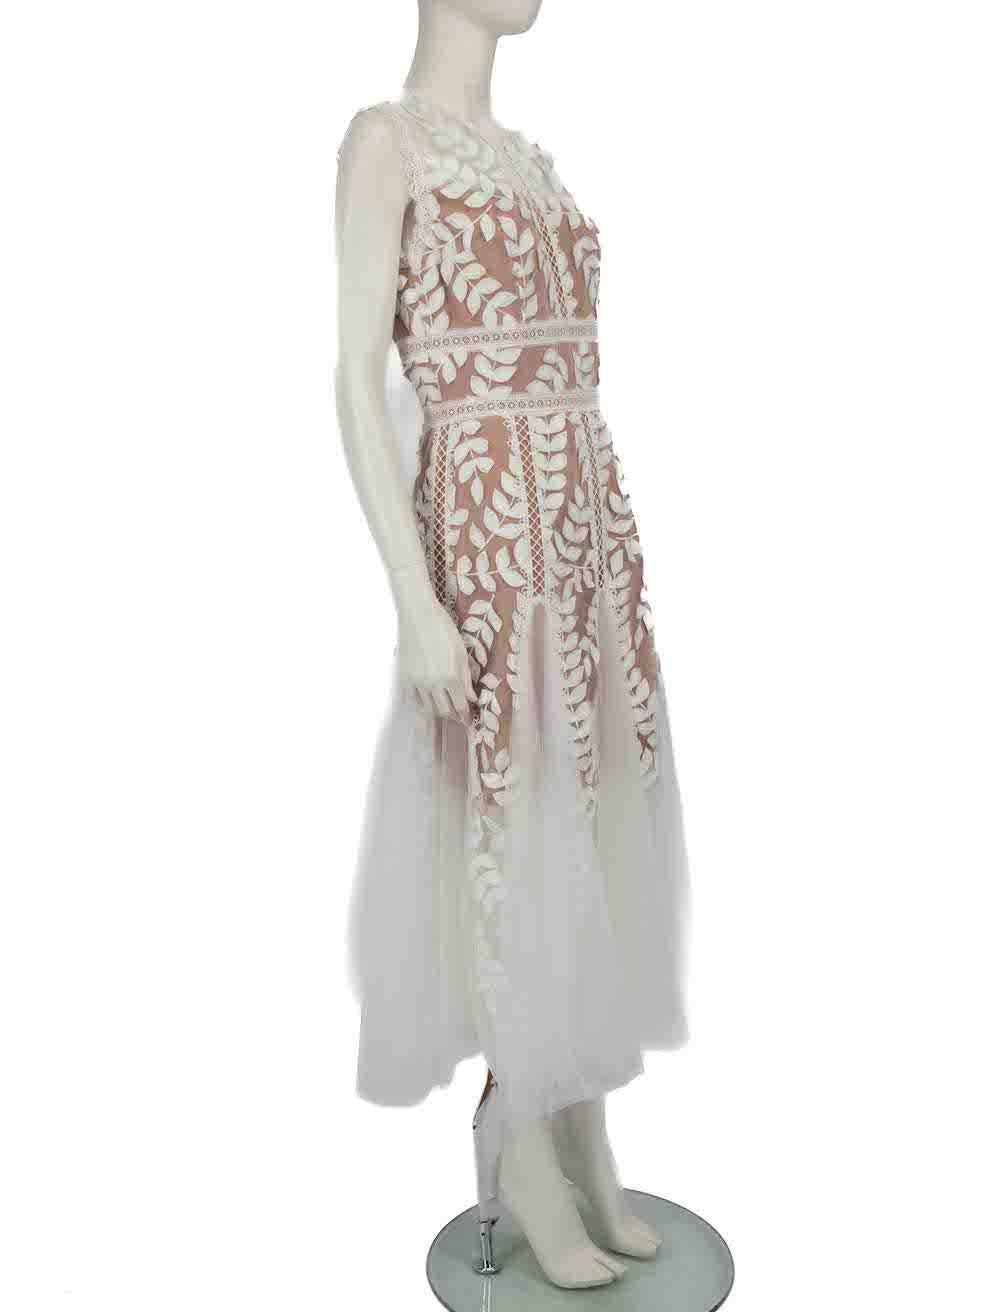 CONDITION is Never worn, with tags. No visible wear to dress is evident on this new Bronx and Banco designer resale item.
 
 
 
 Details
 
 
 White
 
 Polyester
 
 Dress
 
 Midi
 
 Leaf embroidery
 
 Sheer
 
 Sleeveless
 
 Round neck
 
 Back zip